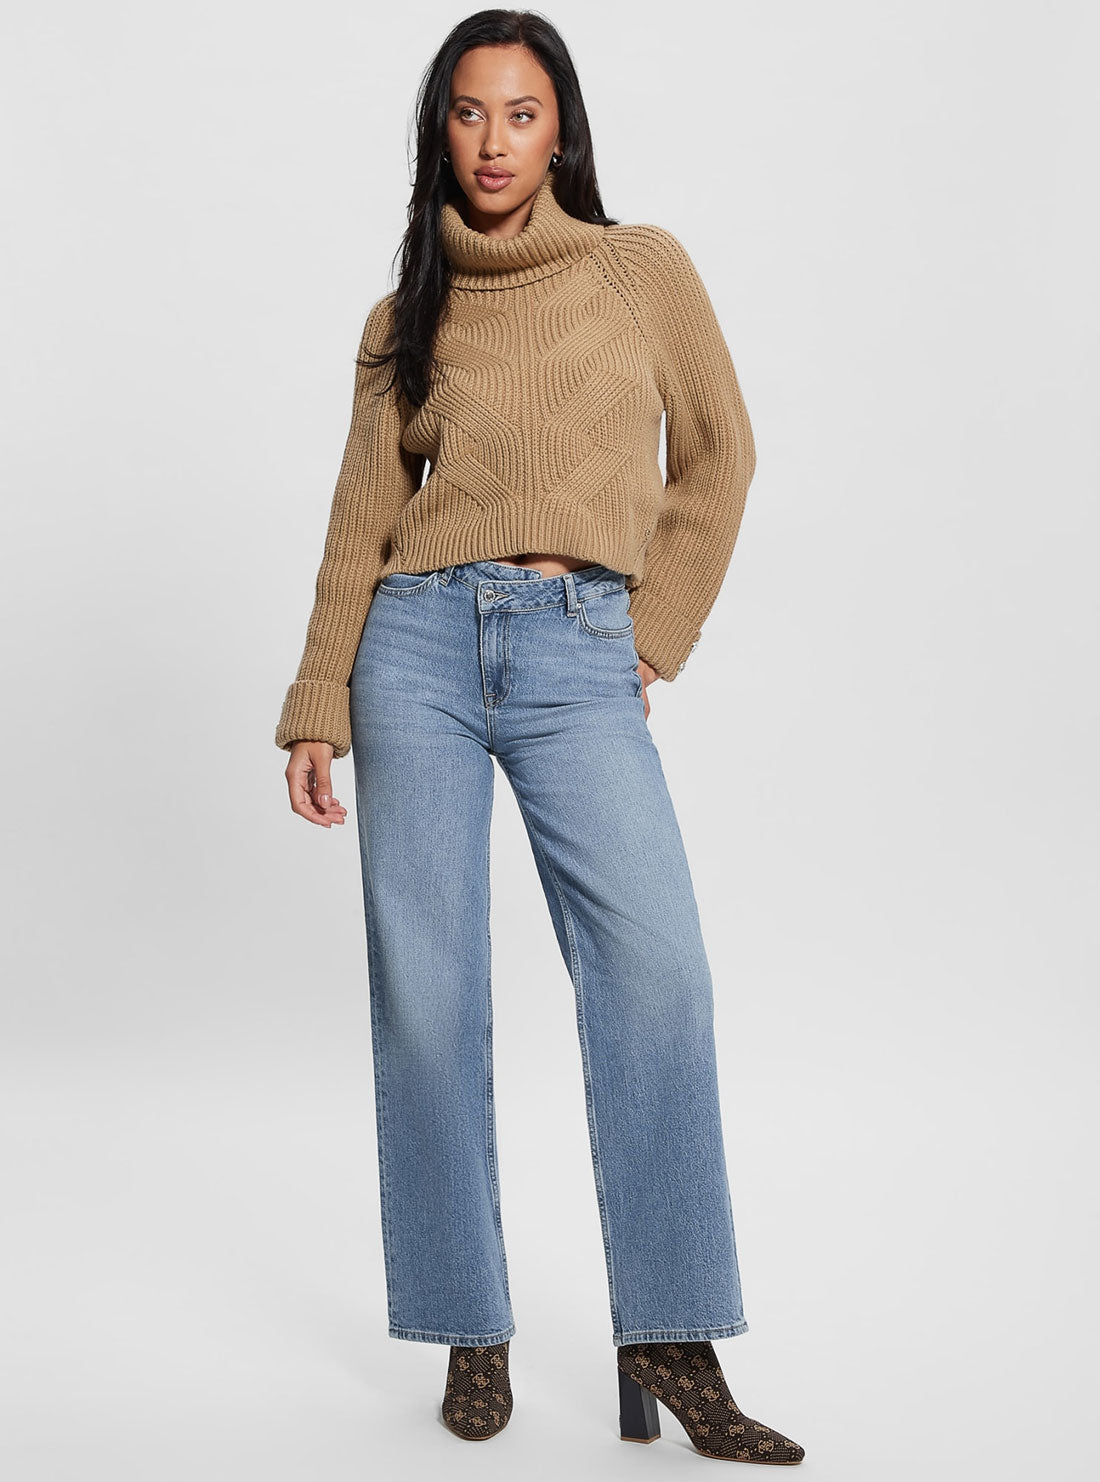 Taupe Brown Lois Turtleneck Knit Top | GUESS Women's Apparel | full view